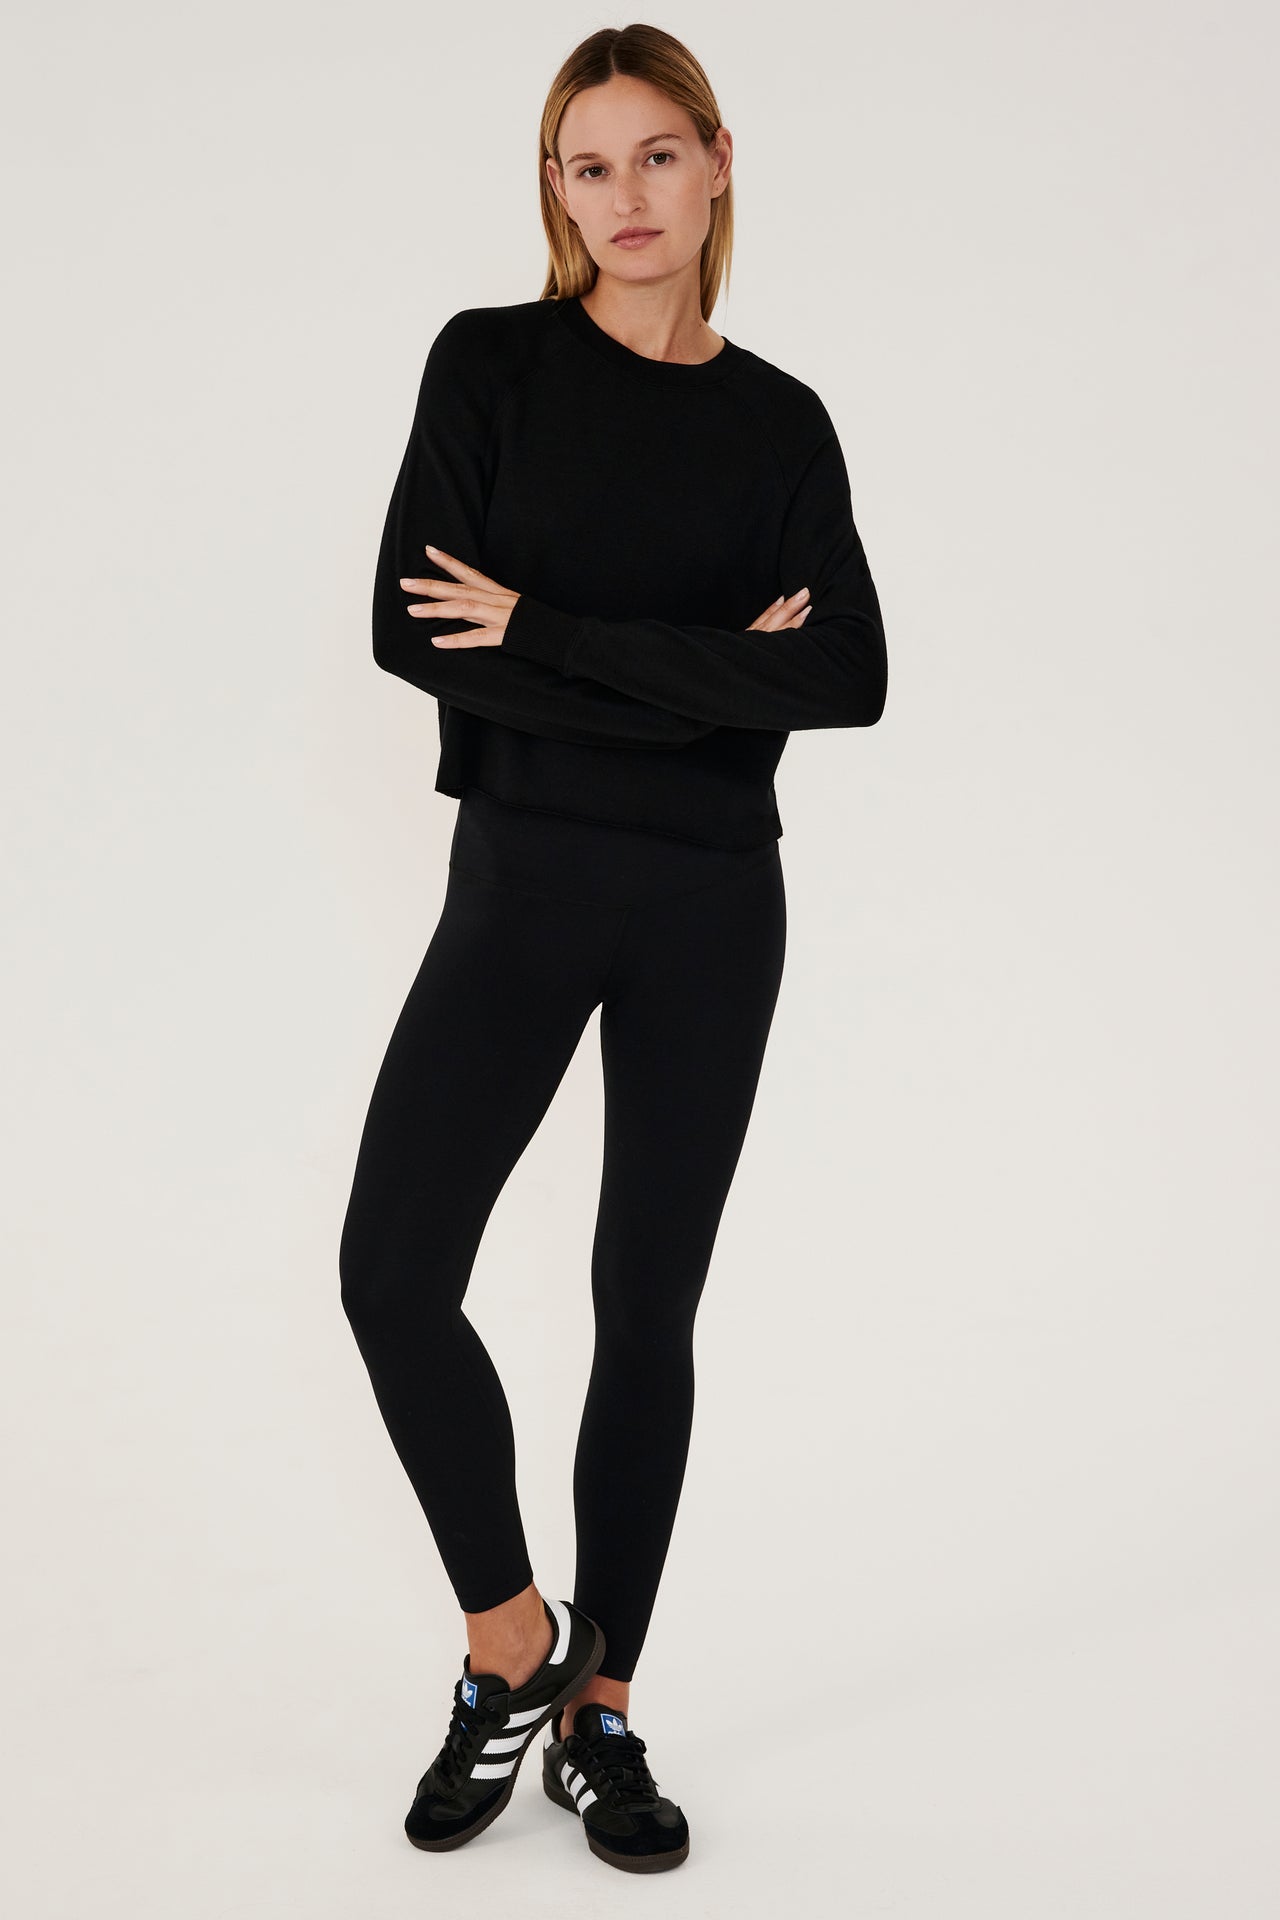 Full front view of woman with dark blonde hair, wearing black cropped sweatshirt with black leggings and wearing black shoes with white stripes